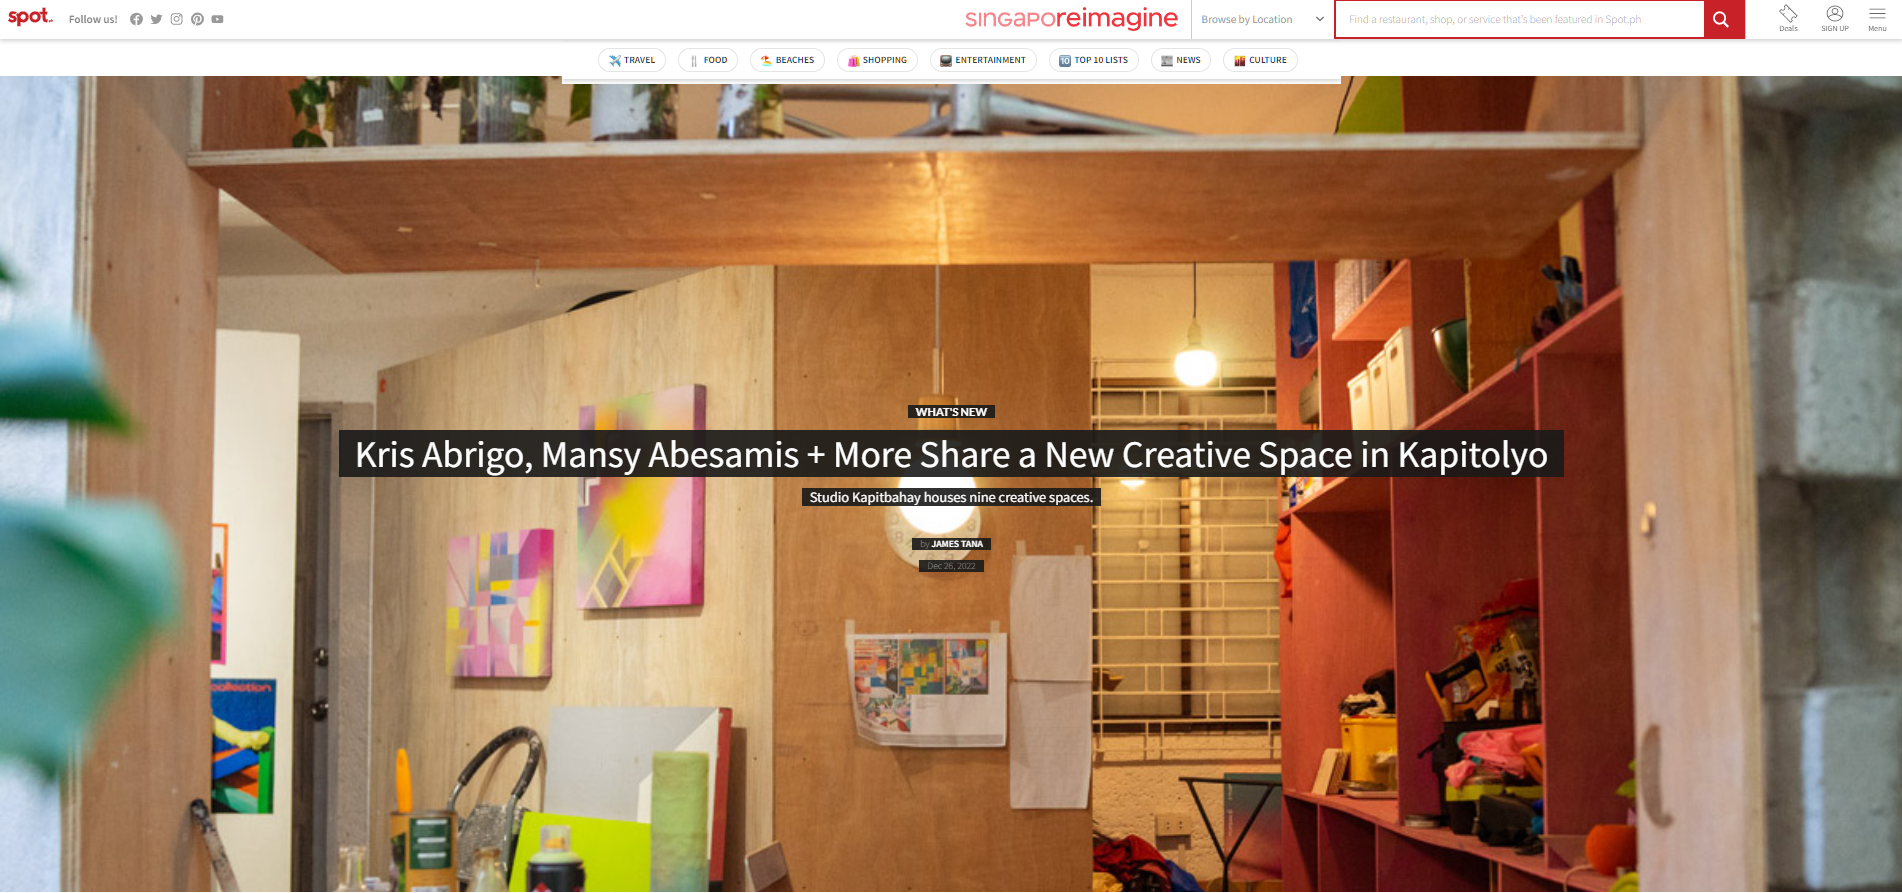 Tearsheets - Spot.PH: Kris Abrigo, Mansy Abesamis + More Share a New Creative Space in Kapitolyo Studio Kapitbahay houses nine creative spaces.